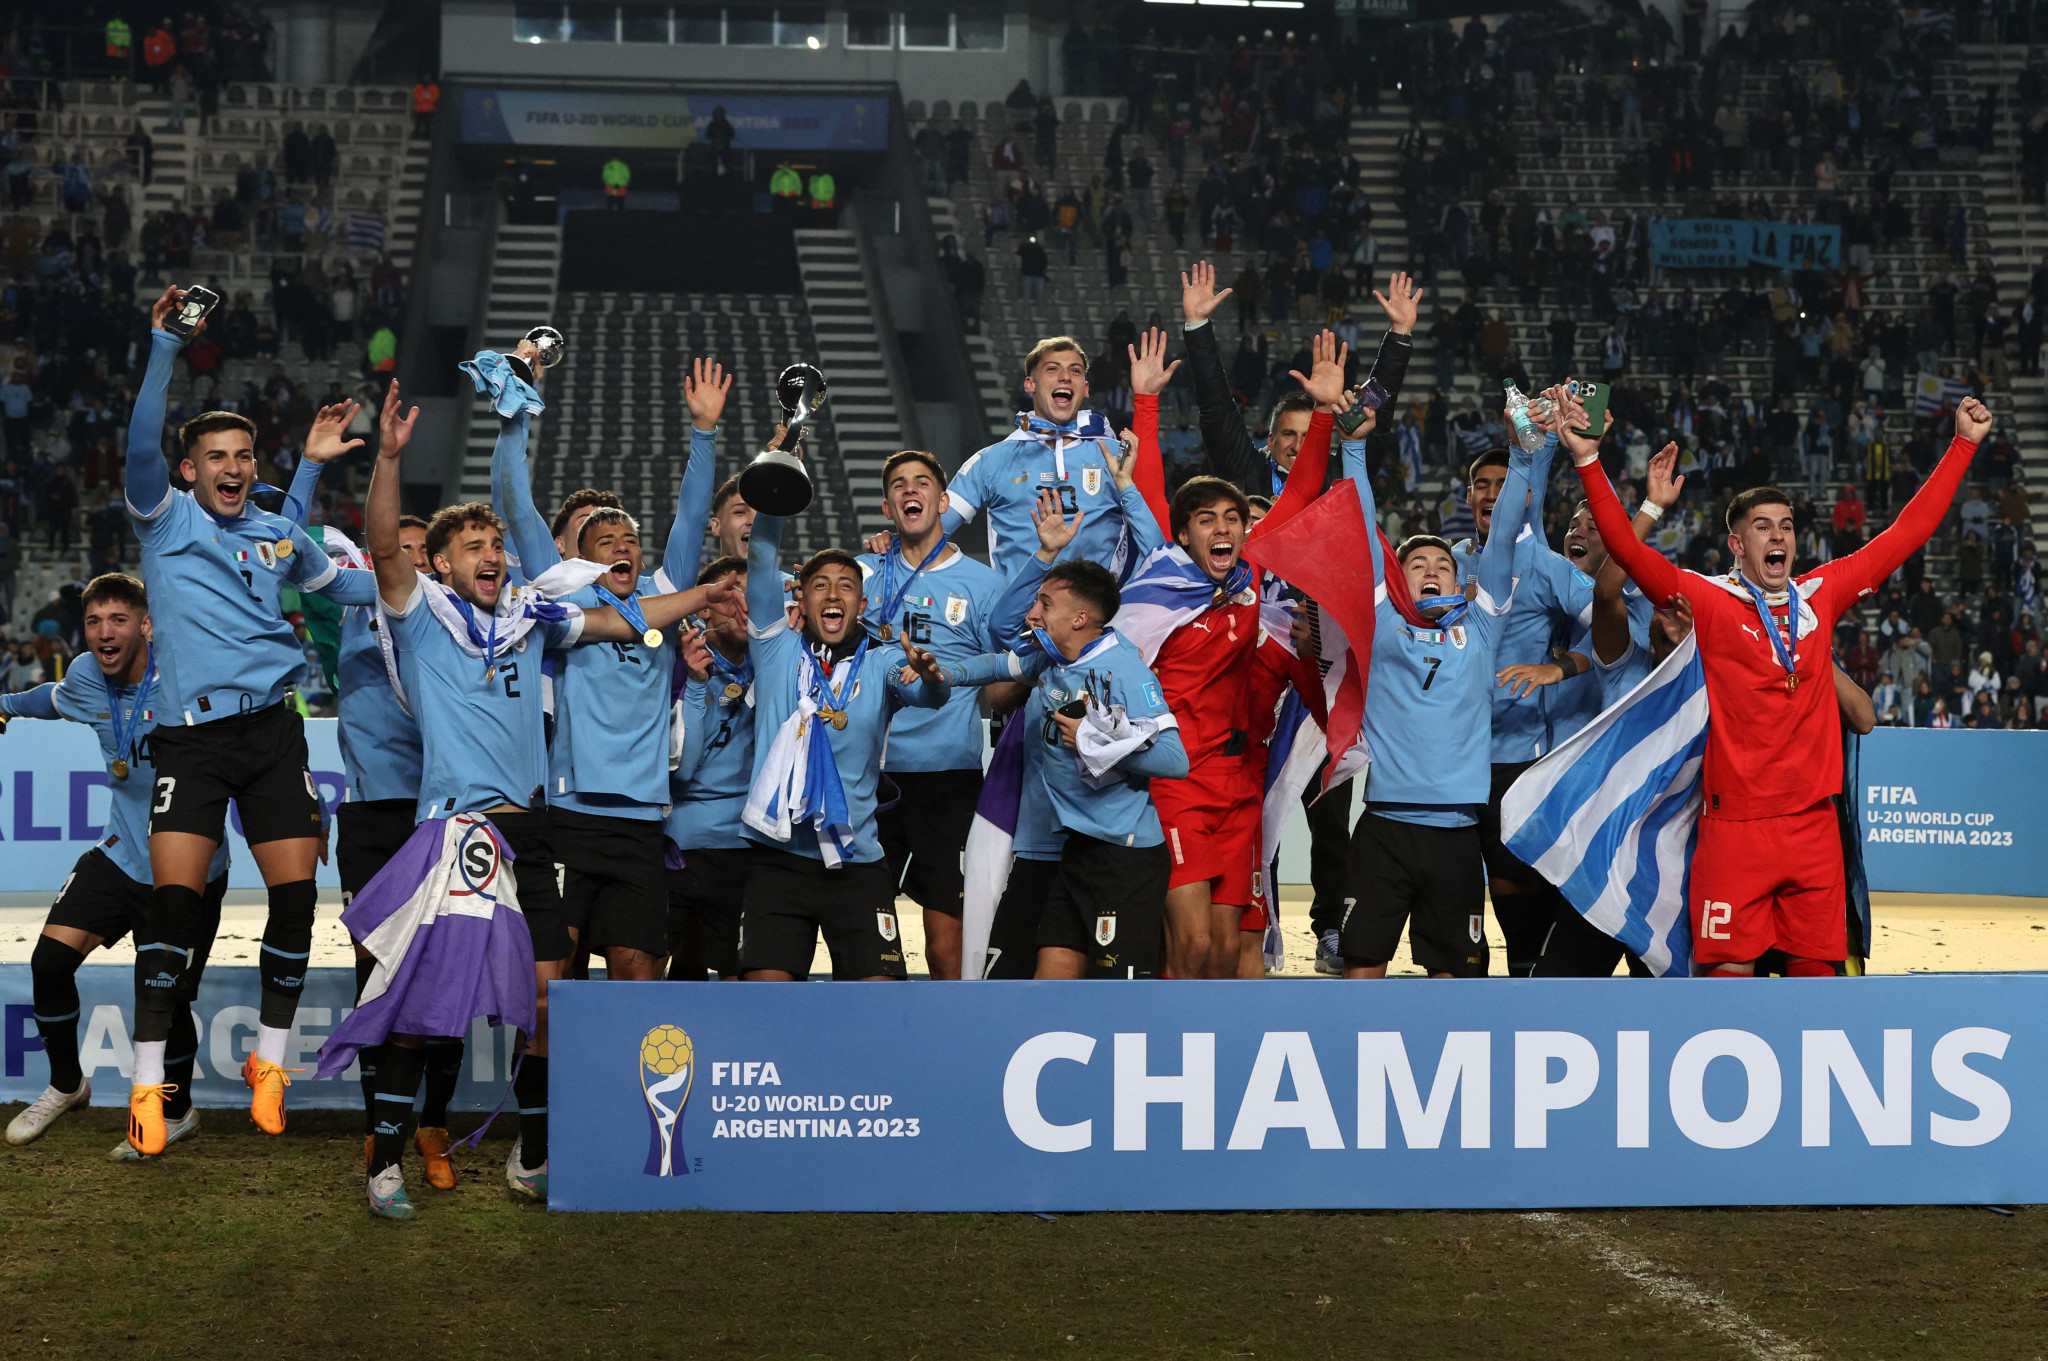 Redemption for Rodríguez as Uruguay lift FIFA Under-20 World Cup